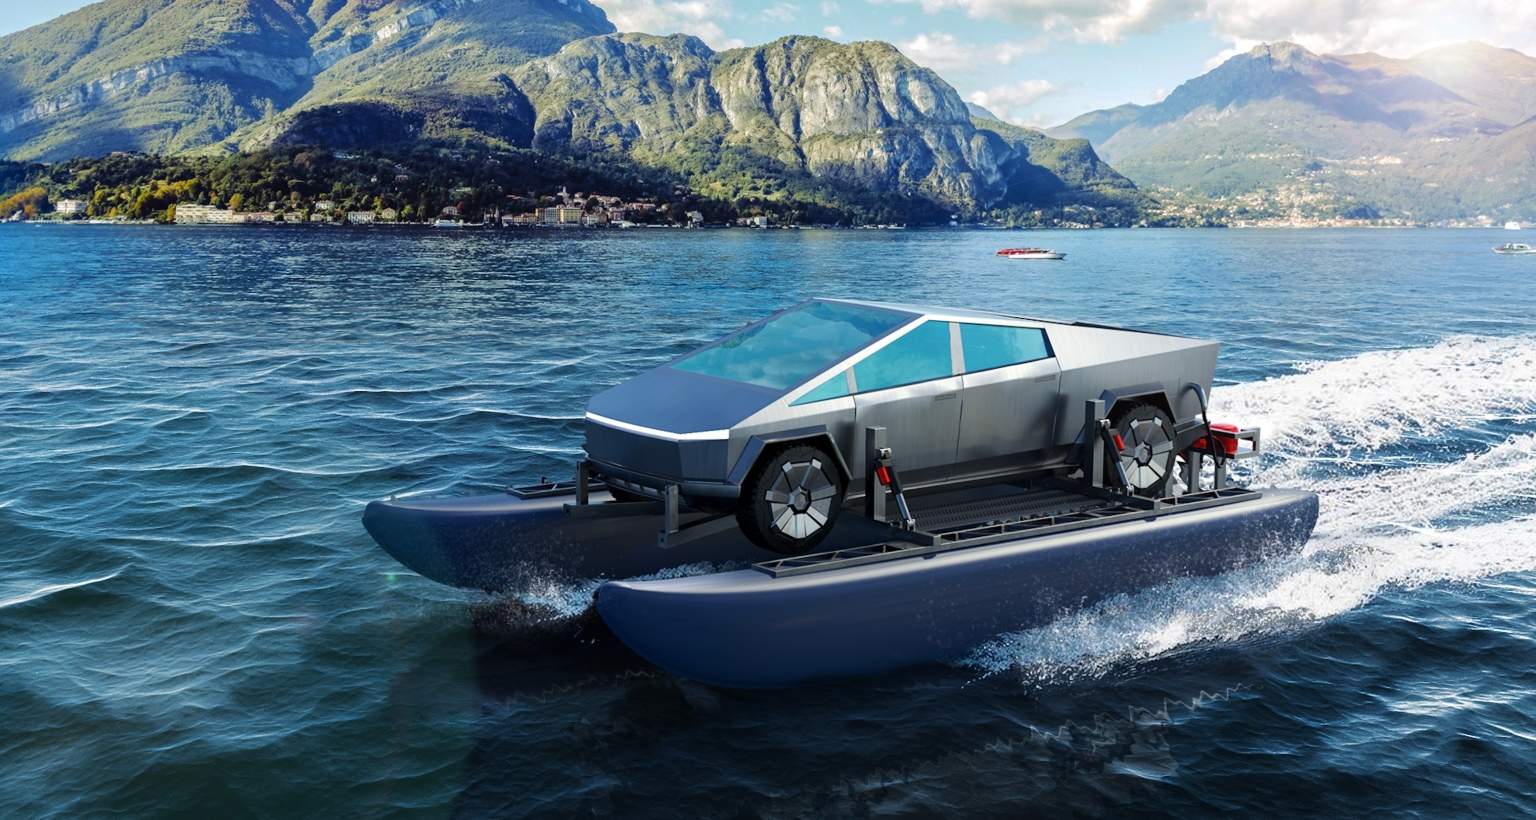 Crbertruck add-on converts to a boat